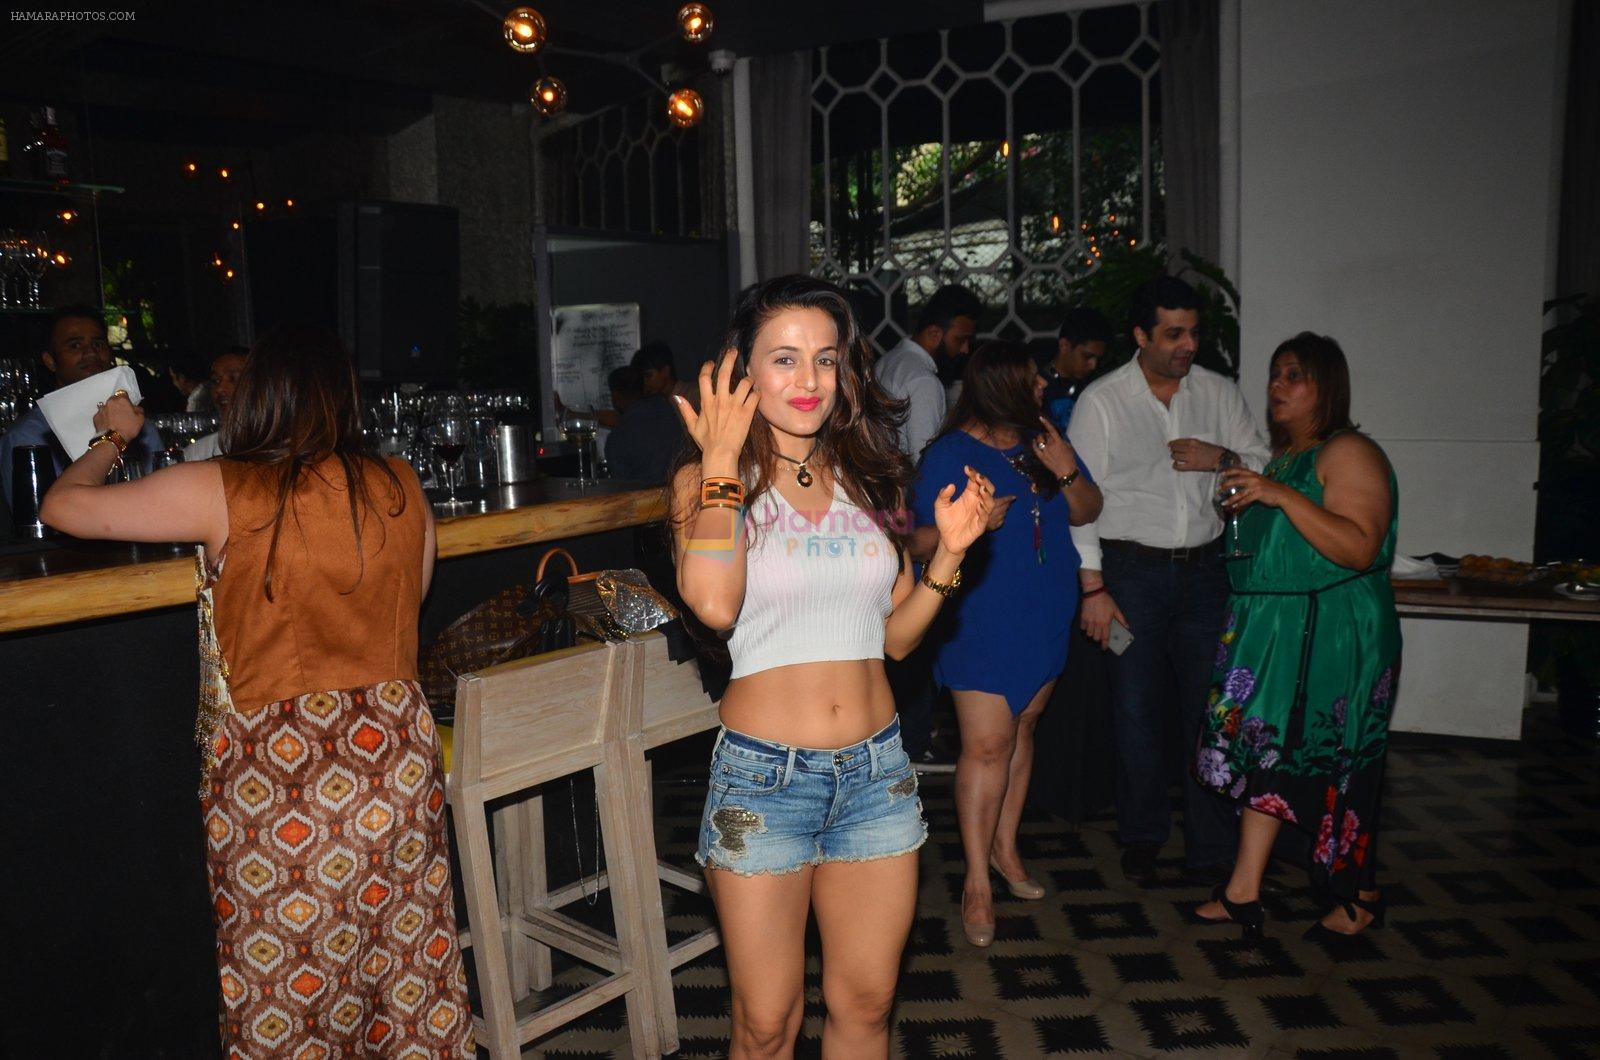 Ameesha Patel snapped at Corner House for friends party on 10th Aug 2016